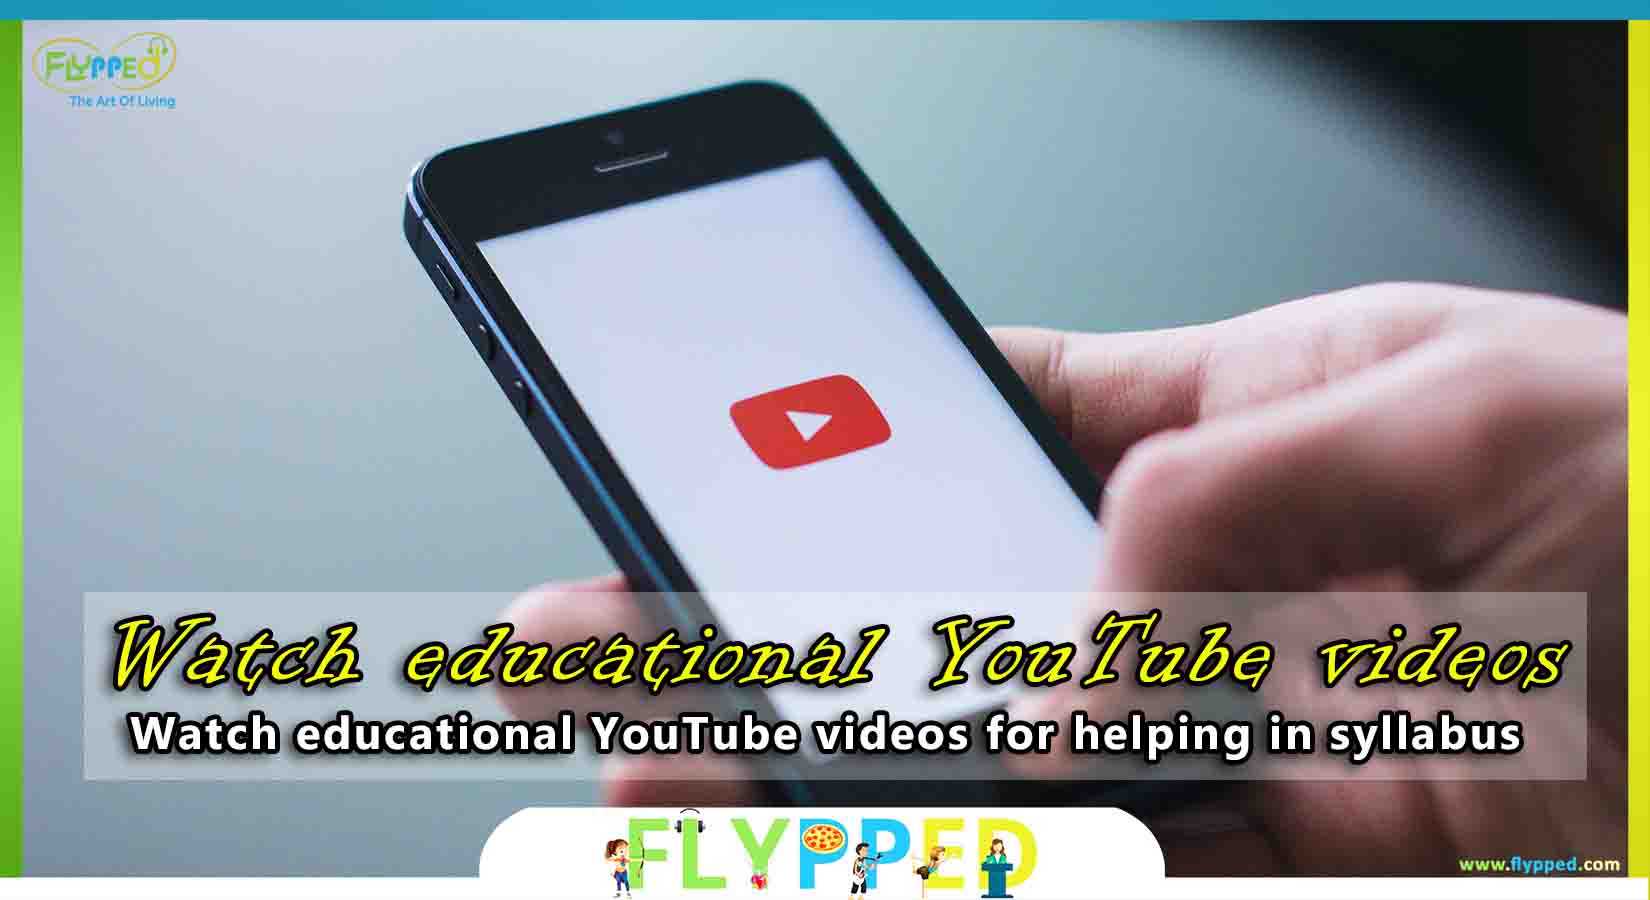 Effective-ways-for-students-to-spend-their-Holidays-educational-videos